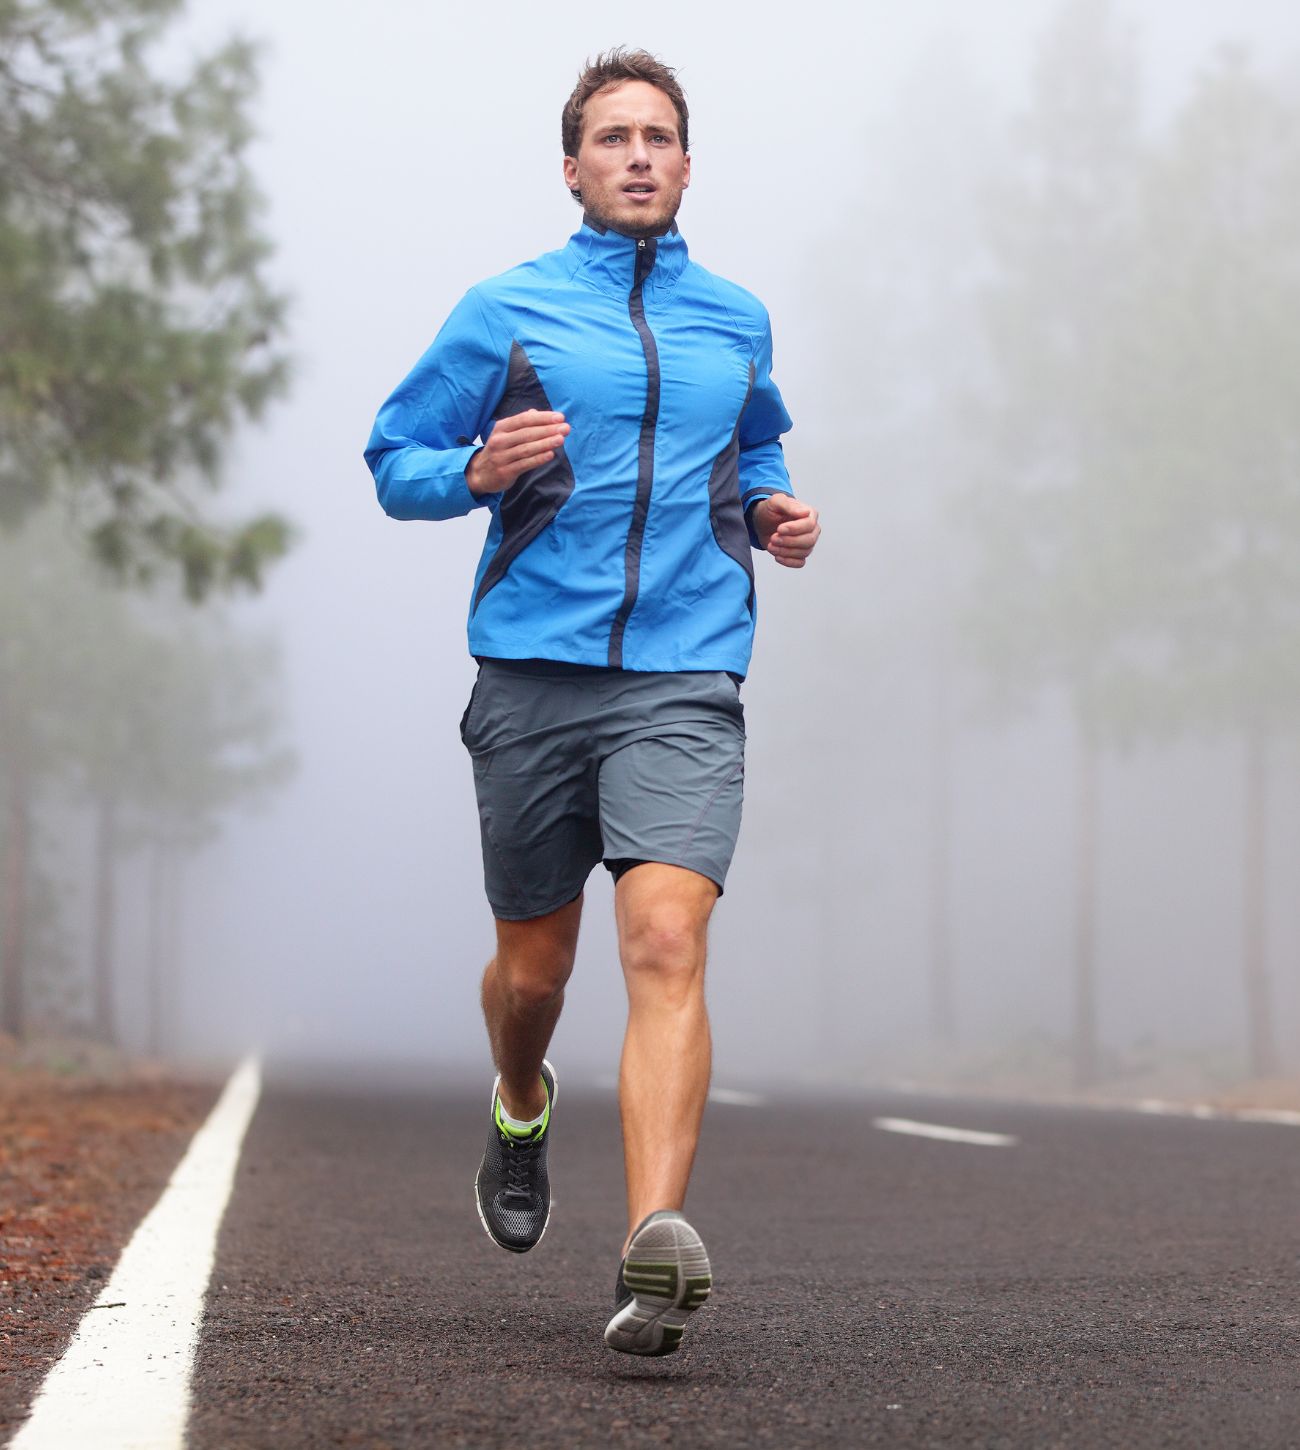 Photo of a man jogging on the road on a cooler, foggy morning.